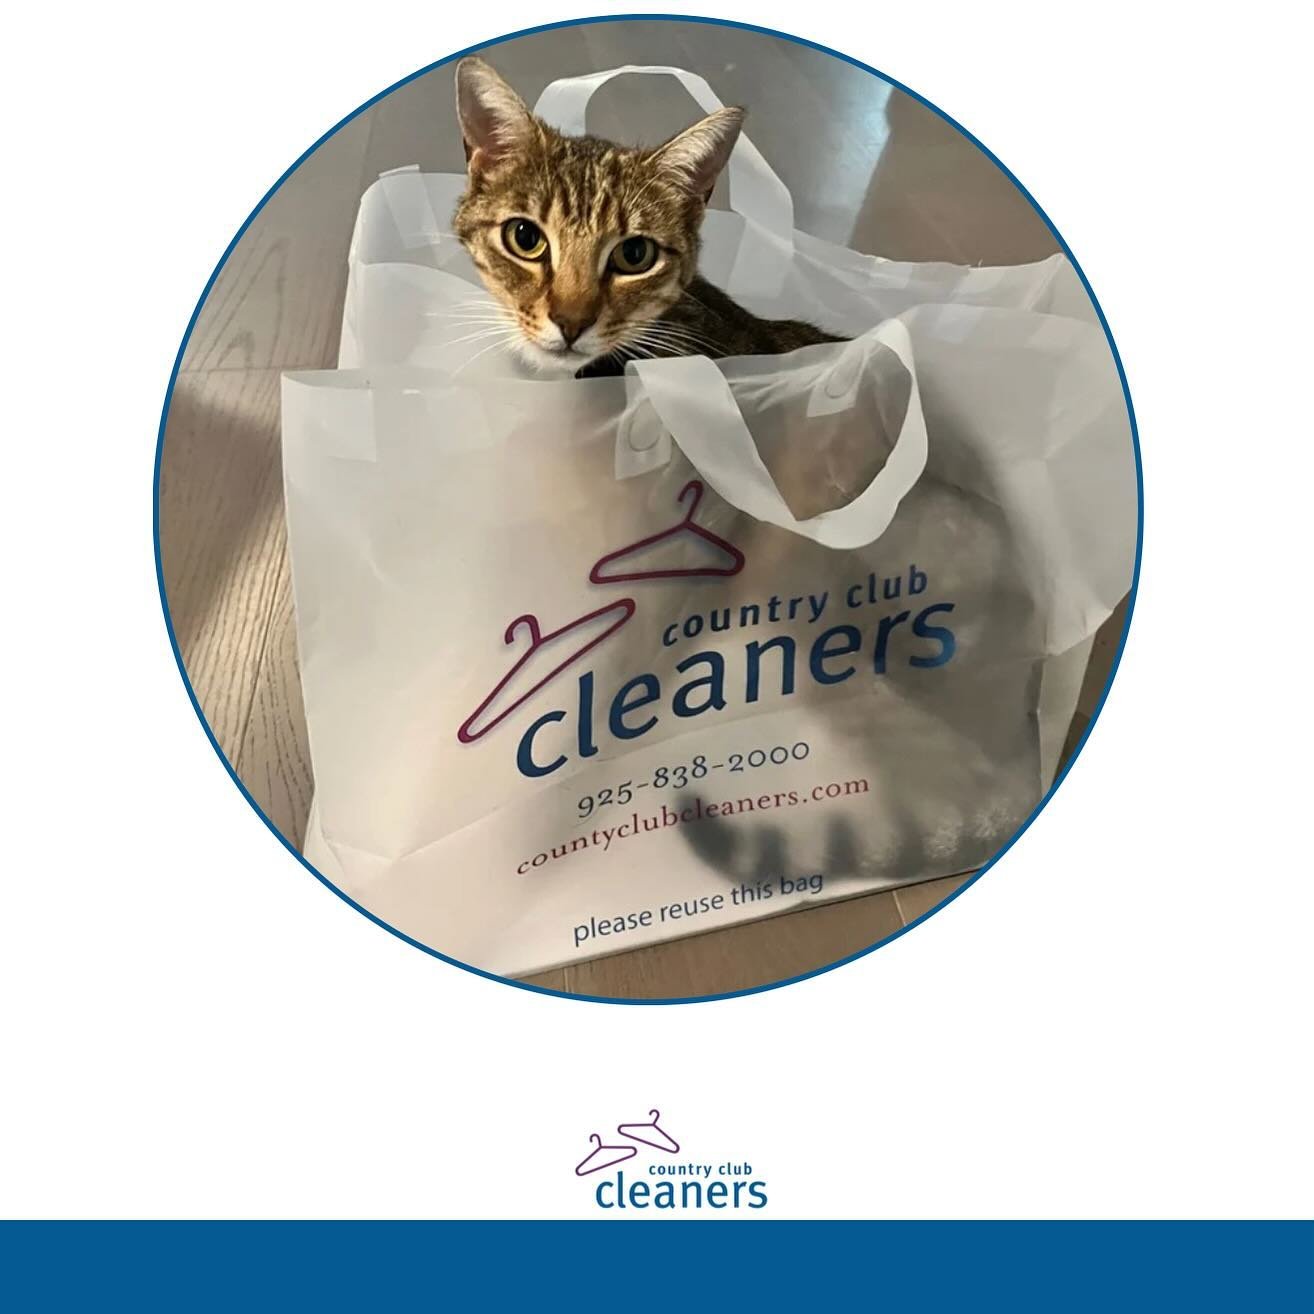 Pets of Country Club Cleaners Part II

Bagged myself a purr-fect solution to laundry day! 

Country Club Cleaners provides free pick up with next day delivery of all your dry cleaning and laundry needs. *Cats not included in delivery*

#CountryClubCl